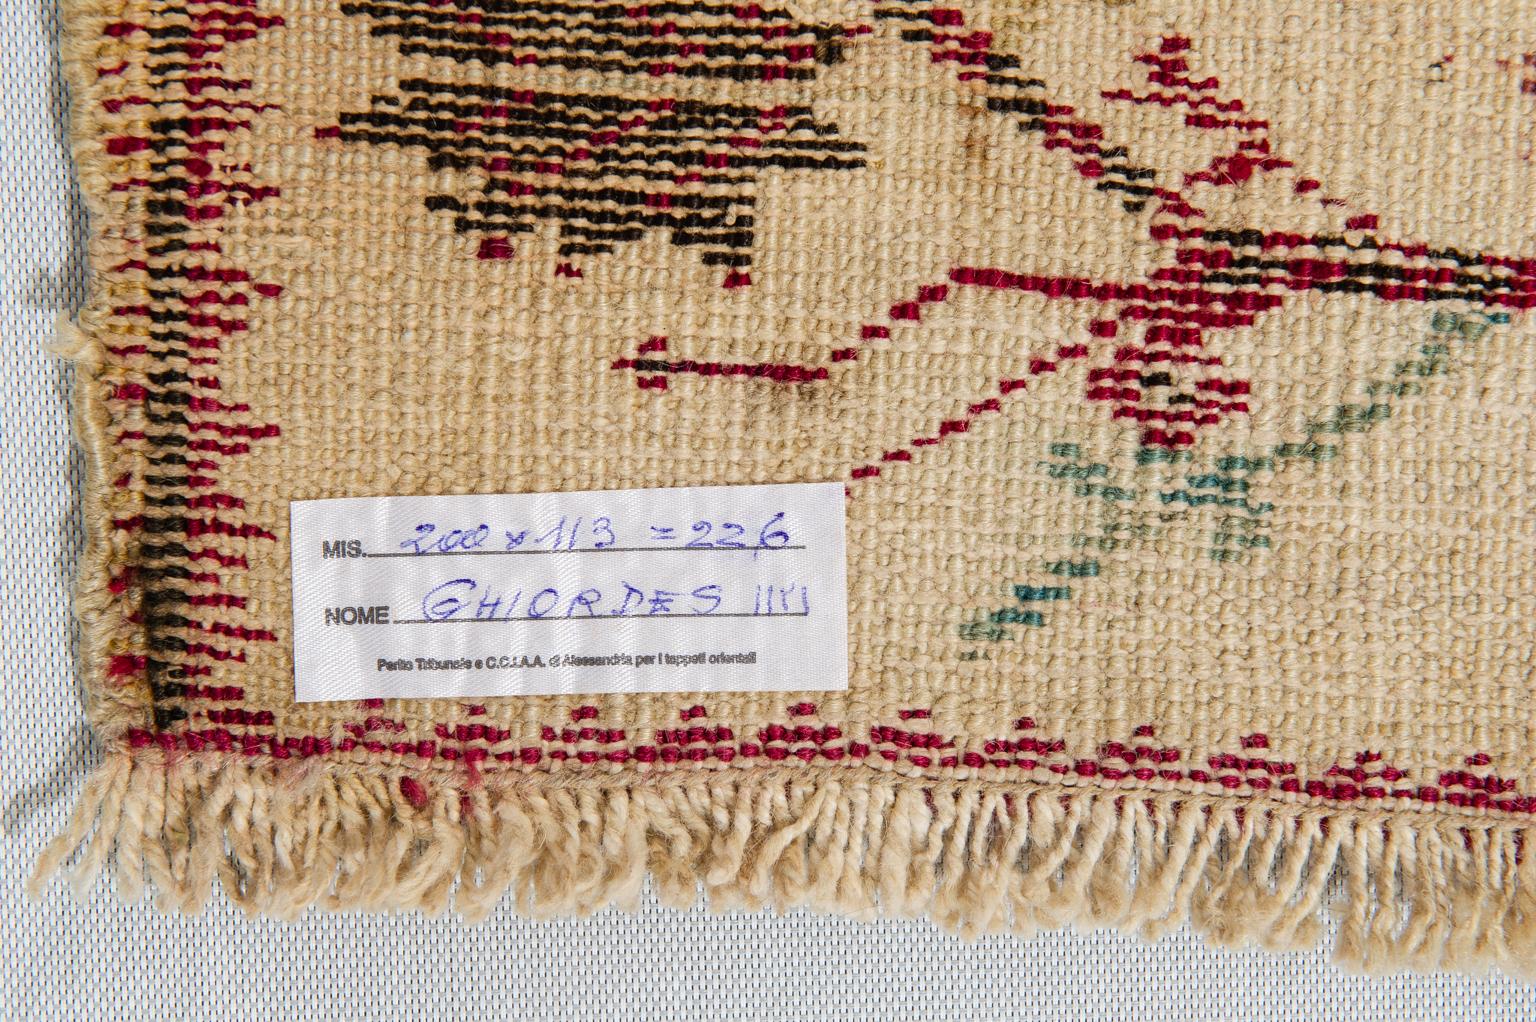 (1121) - Rare antique white Ghiordes prayer from my private collection - one of the most famous Anatolian rugs.
On the white background some raspberry red flowers.
It is from the end of XIX century; its ends have been rebuilt, around 1950.

   